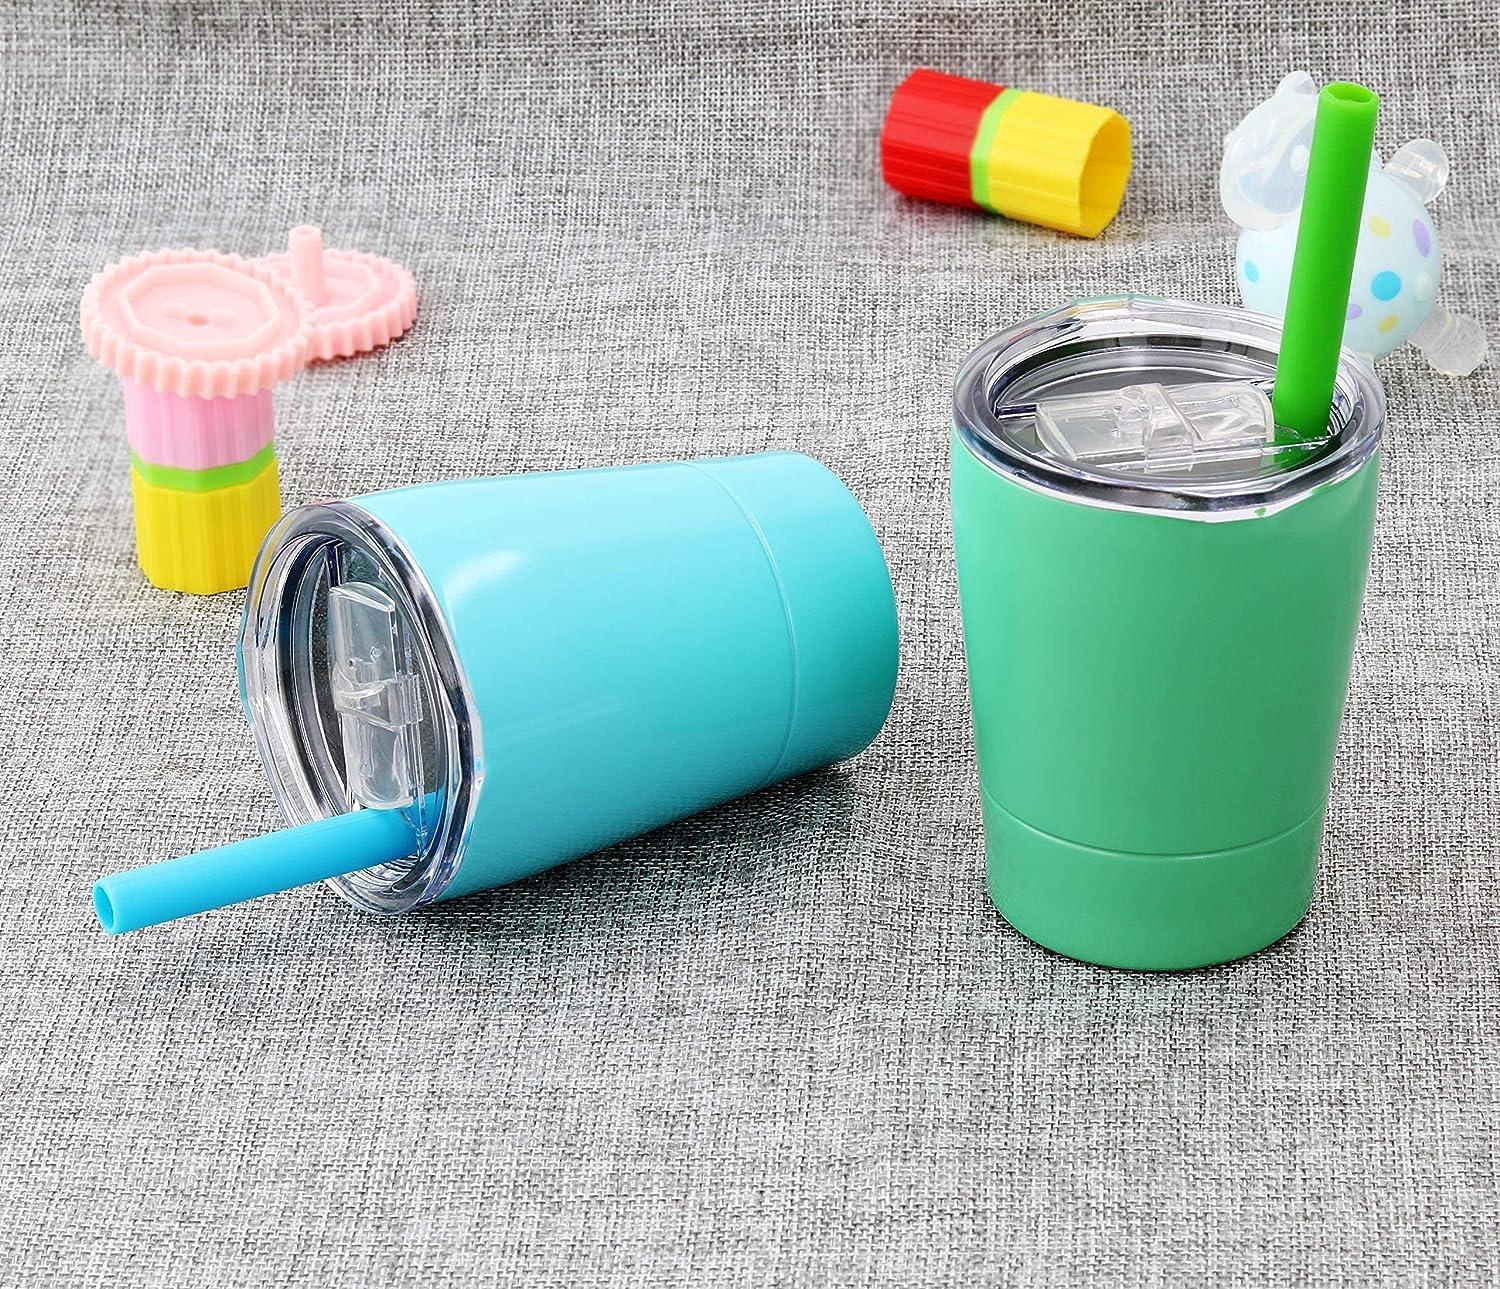 Colorful PoPo Cute Kids and Toddler Tumbler Cup with Lid and Straw